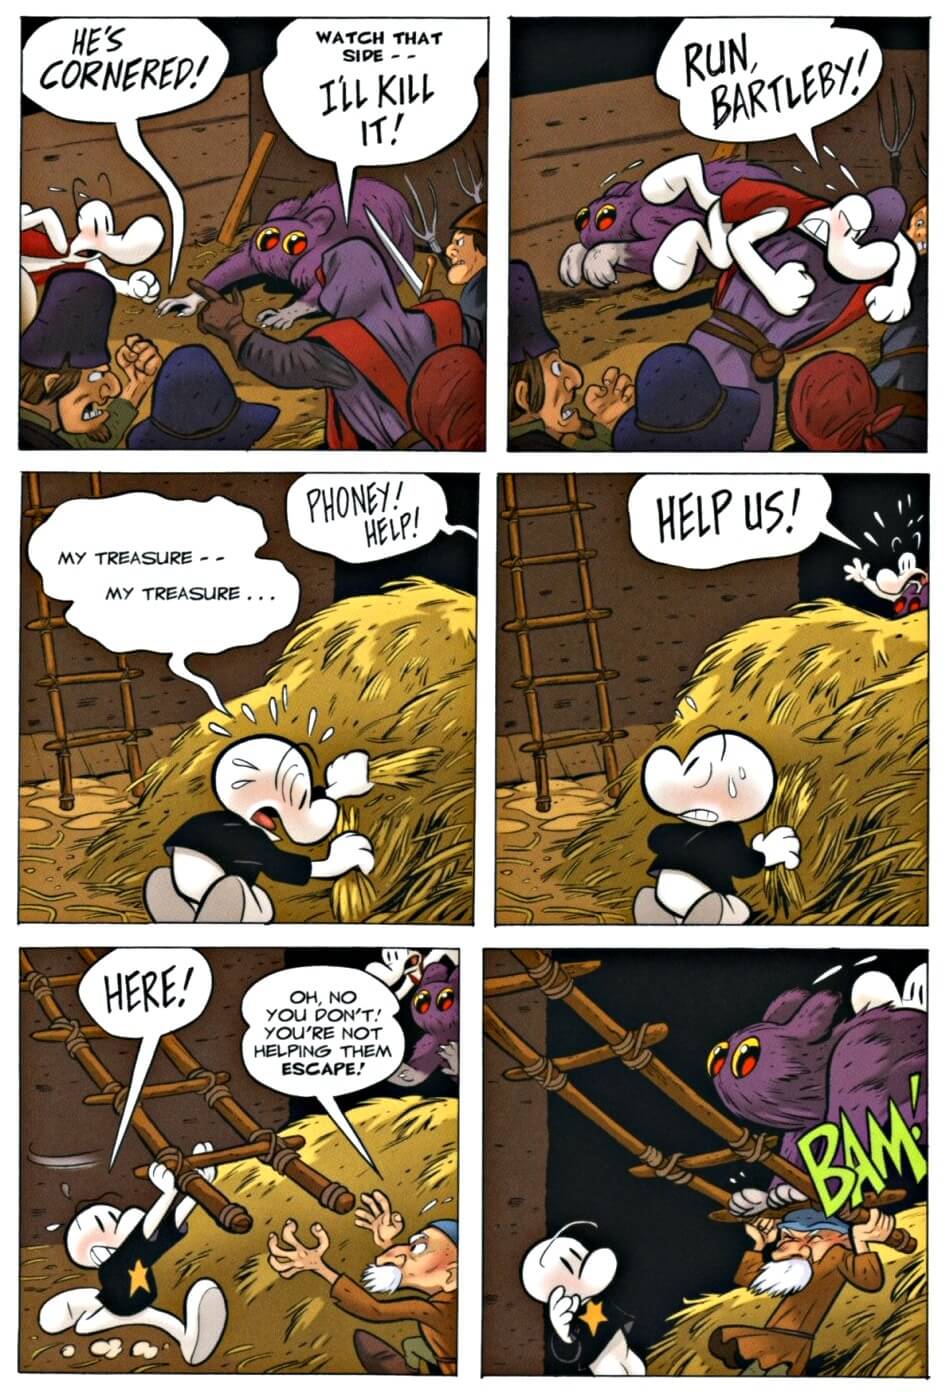 page 77 chapter 3 of bone 9 crown of horns graphic novel